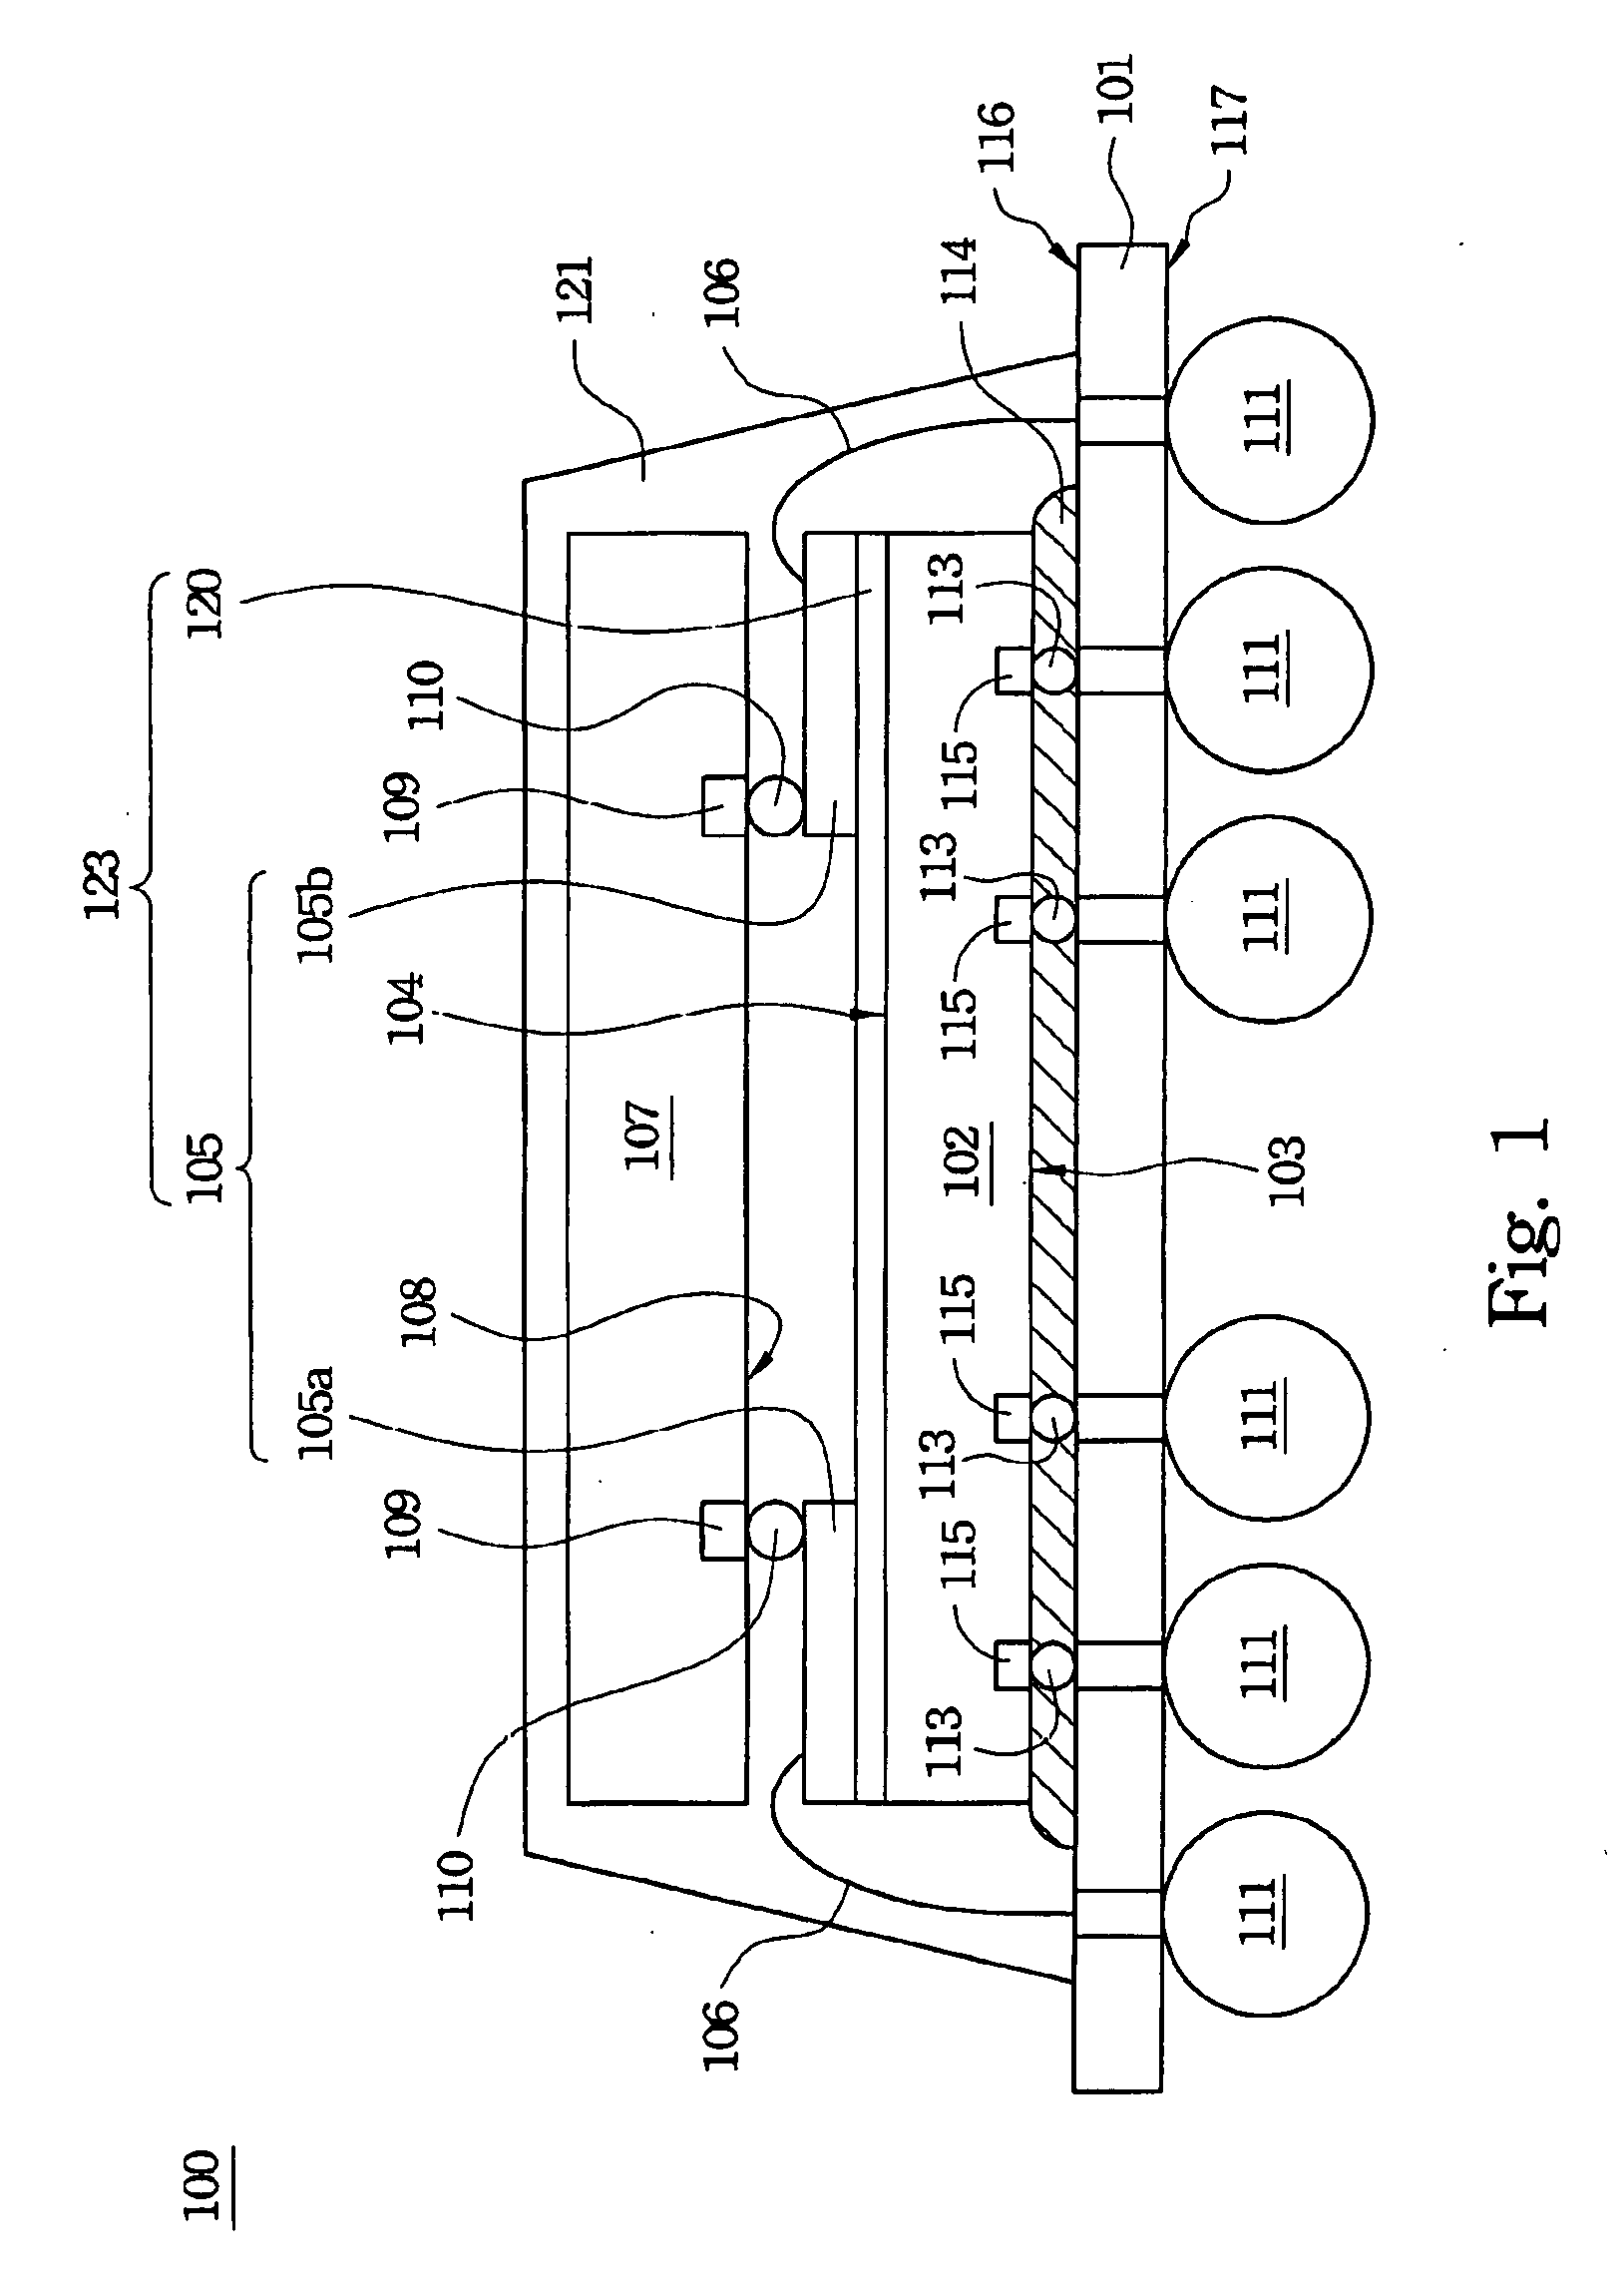 Chip-Stacked Package Structure and Applications Thereof